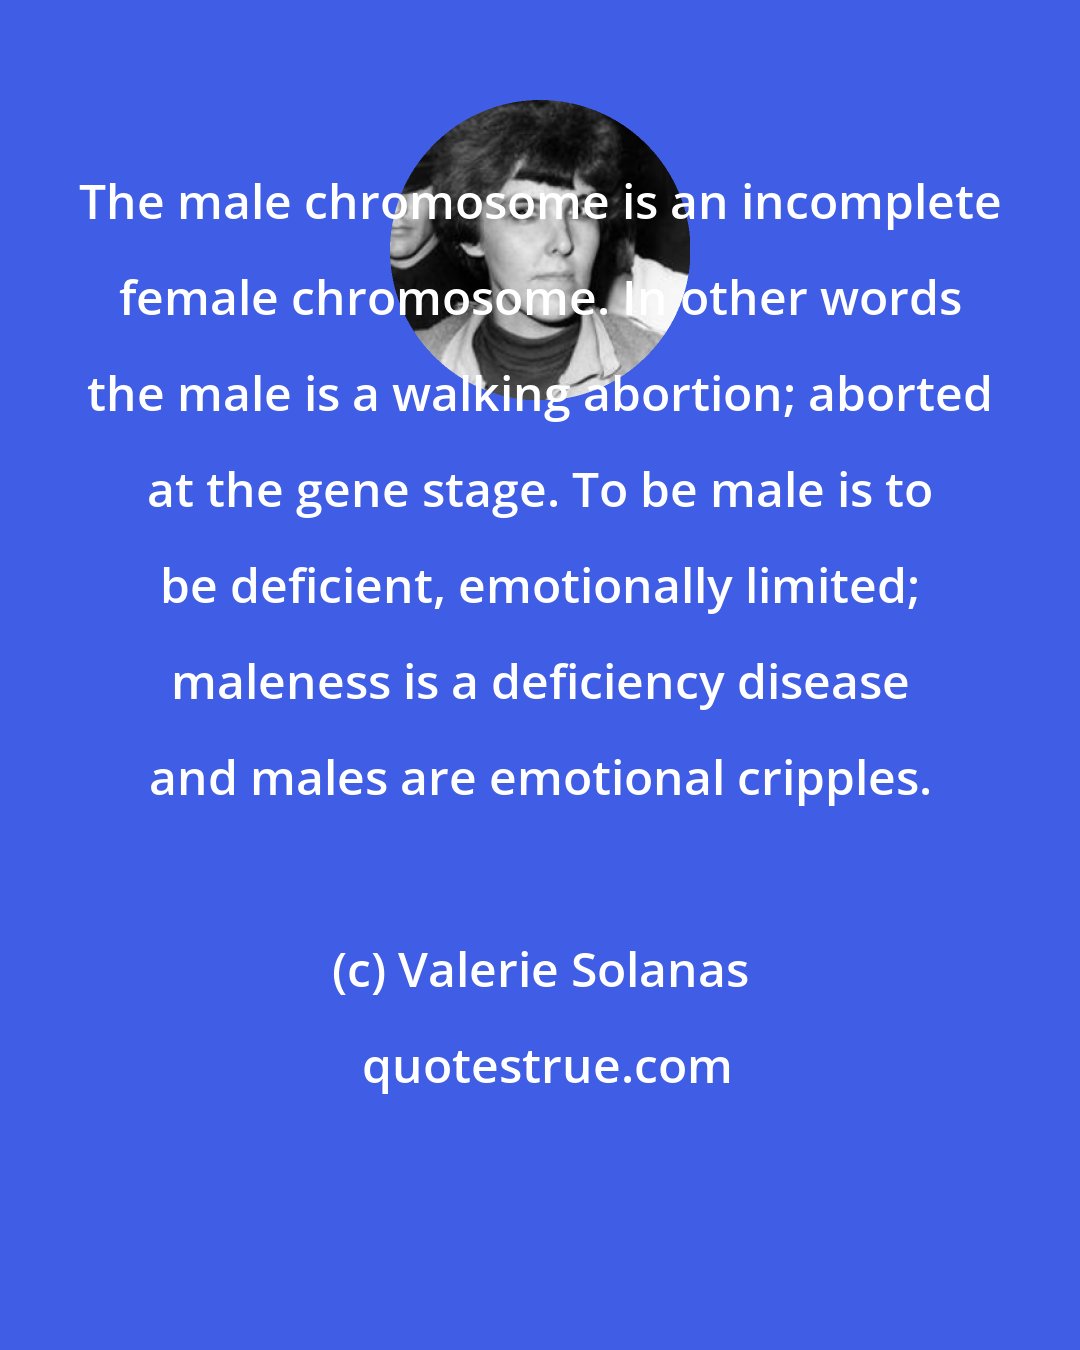 Valerie Solanas: The male chromosome is an incomplete female chromosome. In other words the male is a walking abortion; aborted at the gene stage. To be male is to be deficient, emotionally limited; maleness is a deficiency disease and males are emotional cripples.